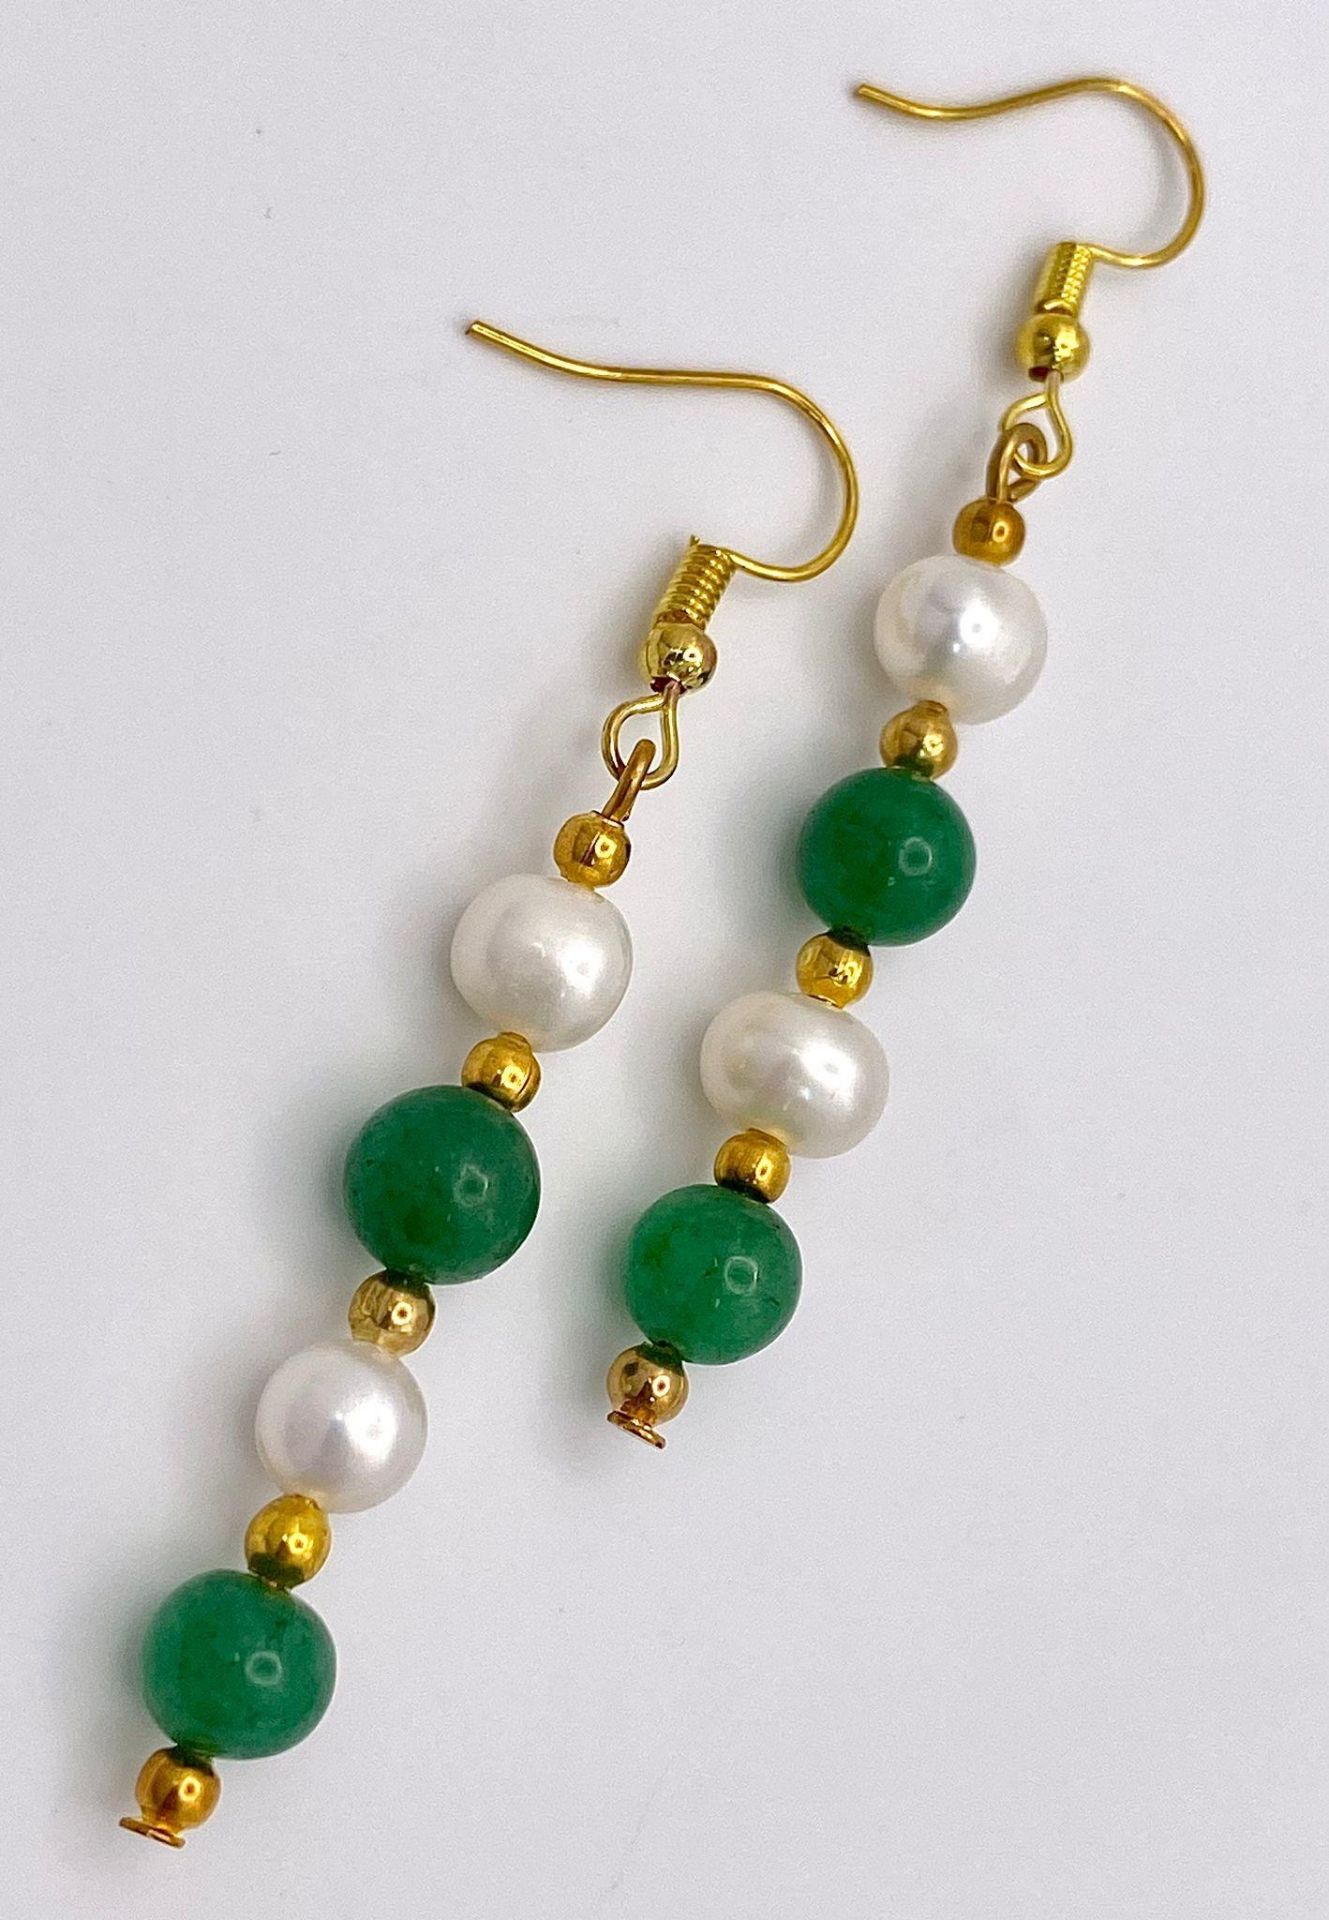 A stunning, three row necklace of alternating green jade and natural white pearls from South Pacific - Image 3 of 4